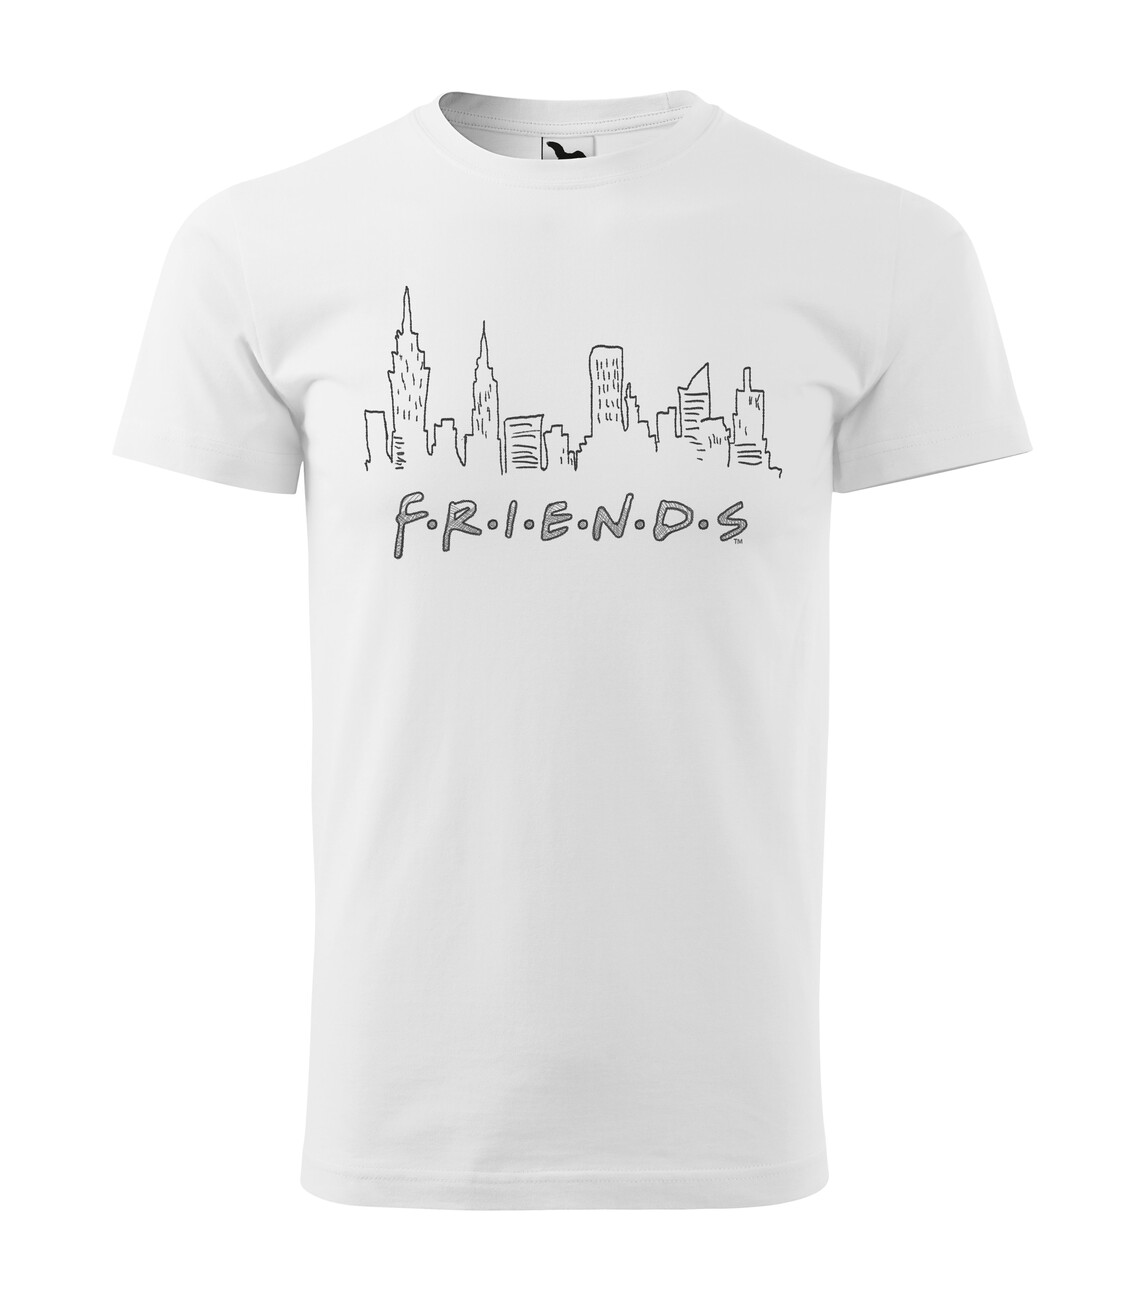 accessories | Clothes Friends for - Logo fans and merchandise